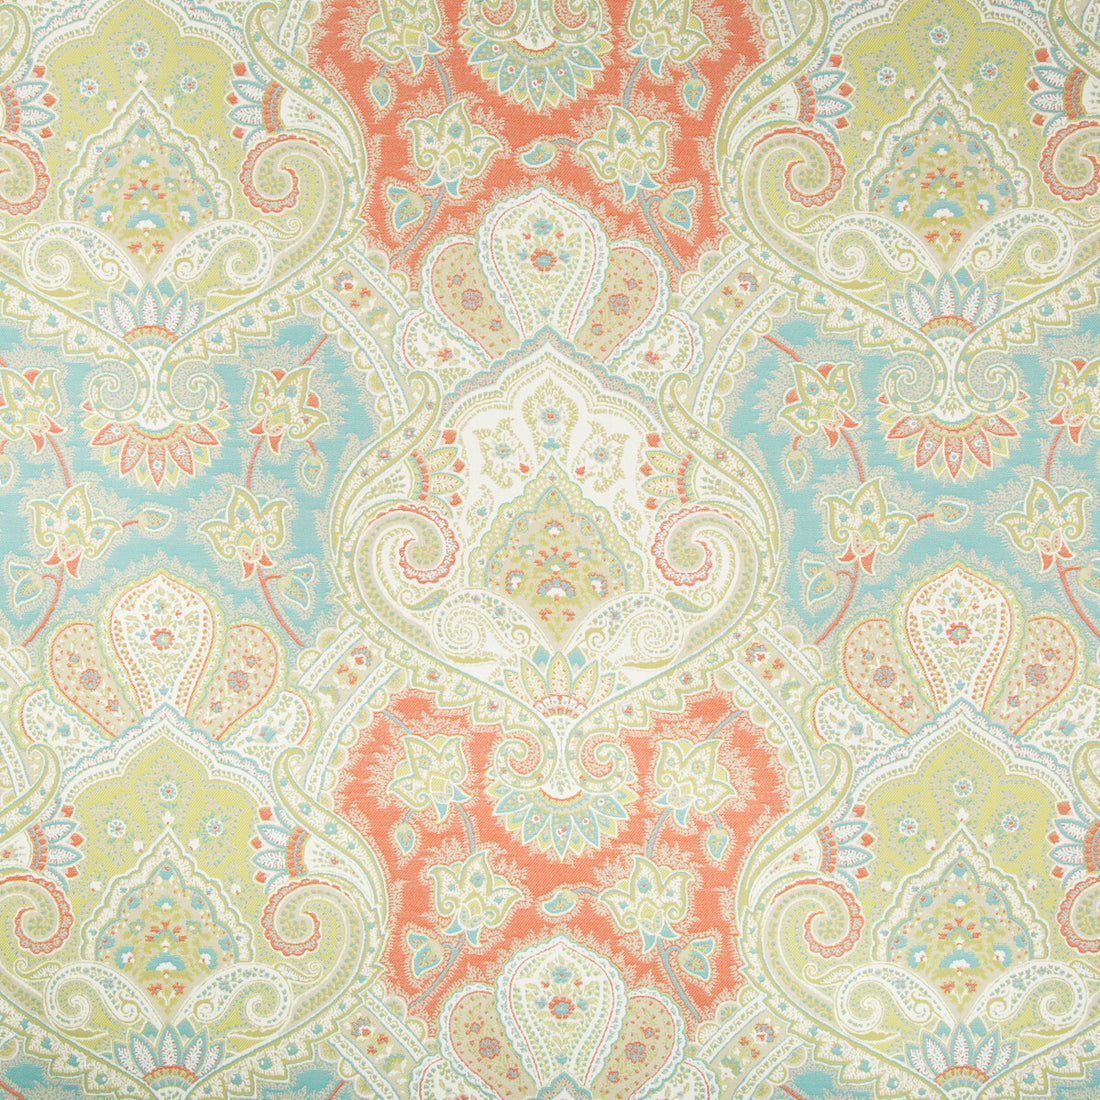 Artemest fabric in tropicale color - pattern 34558.915.0 - by Kravet Design in the Echo Indoor Outdoor Ibiza collection